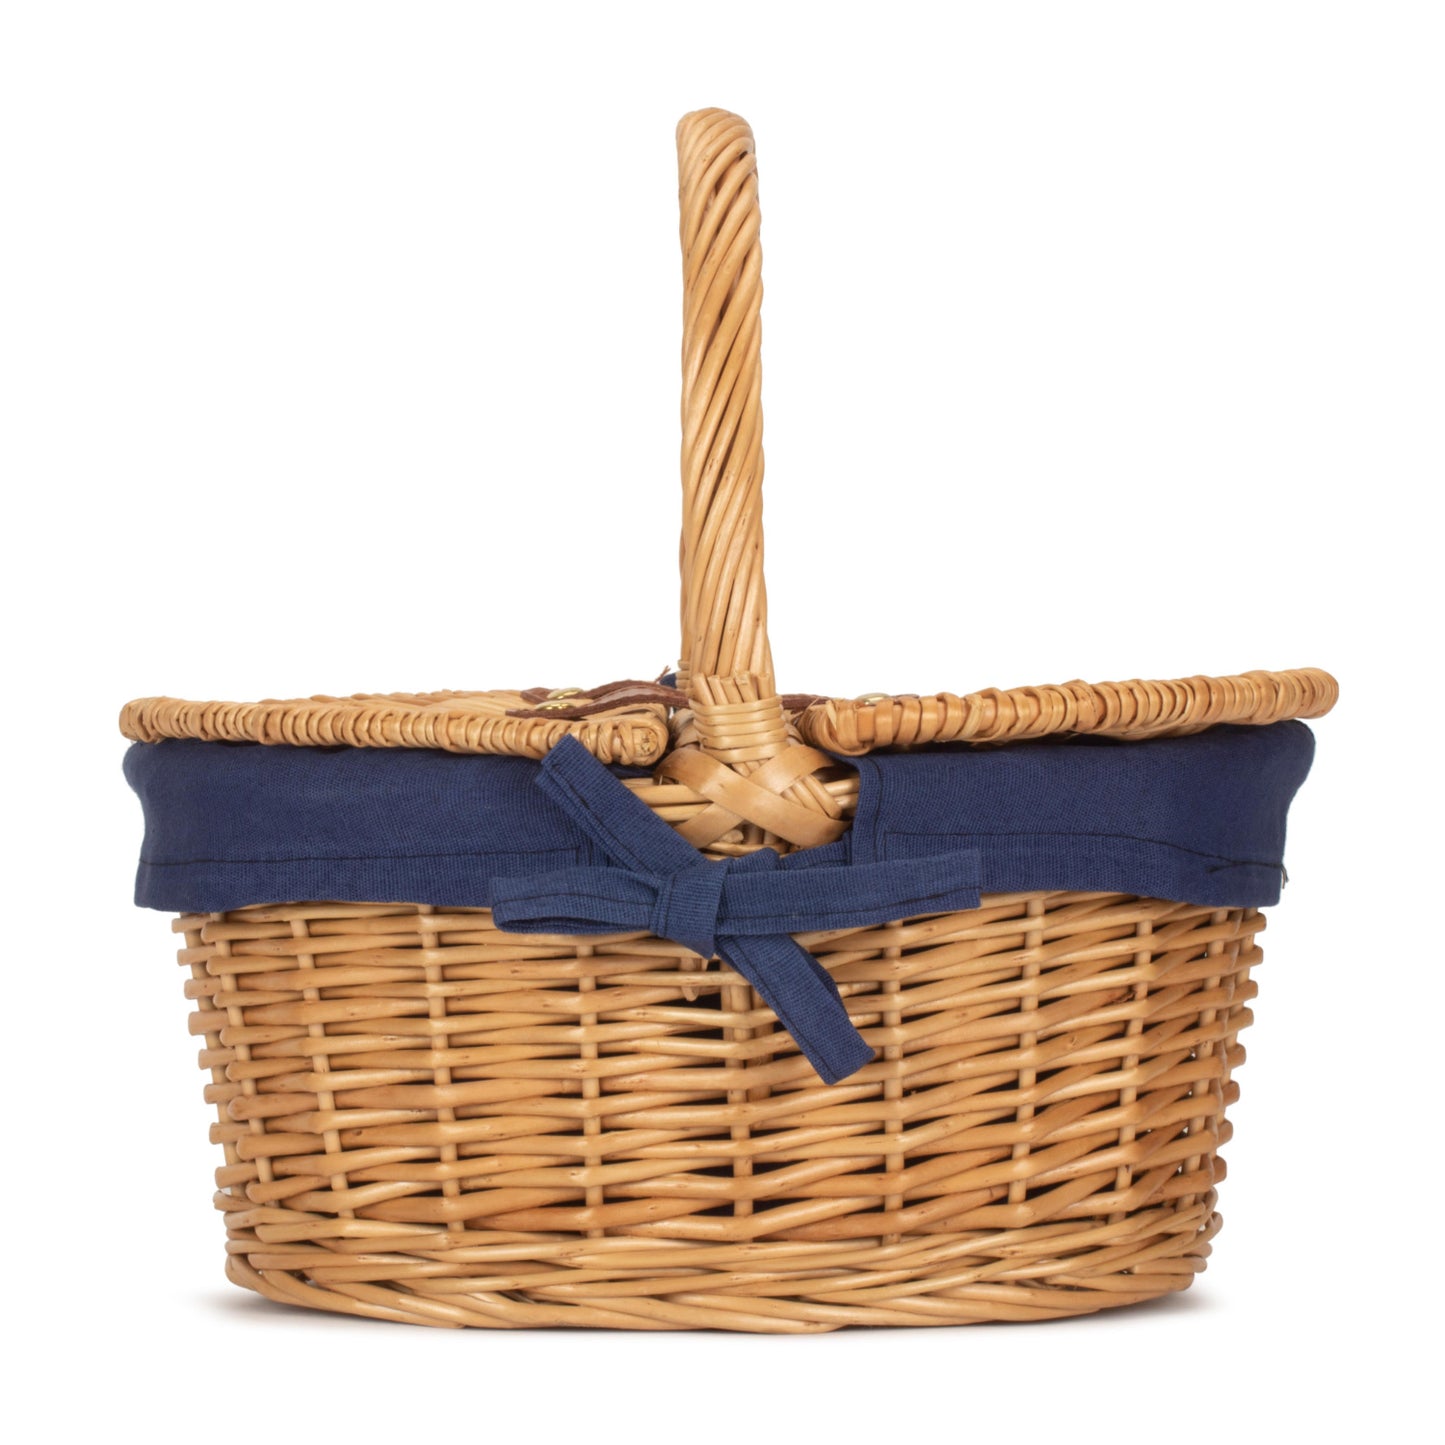 Child's Oval Lined Lidded Hamper With Navy Blue Lining